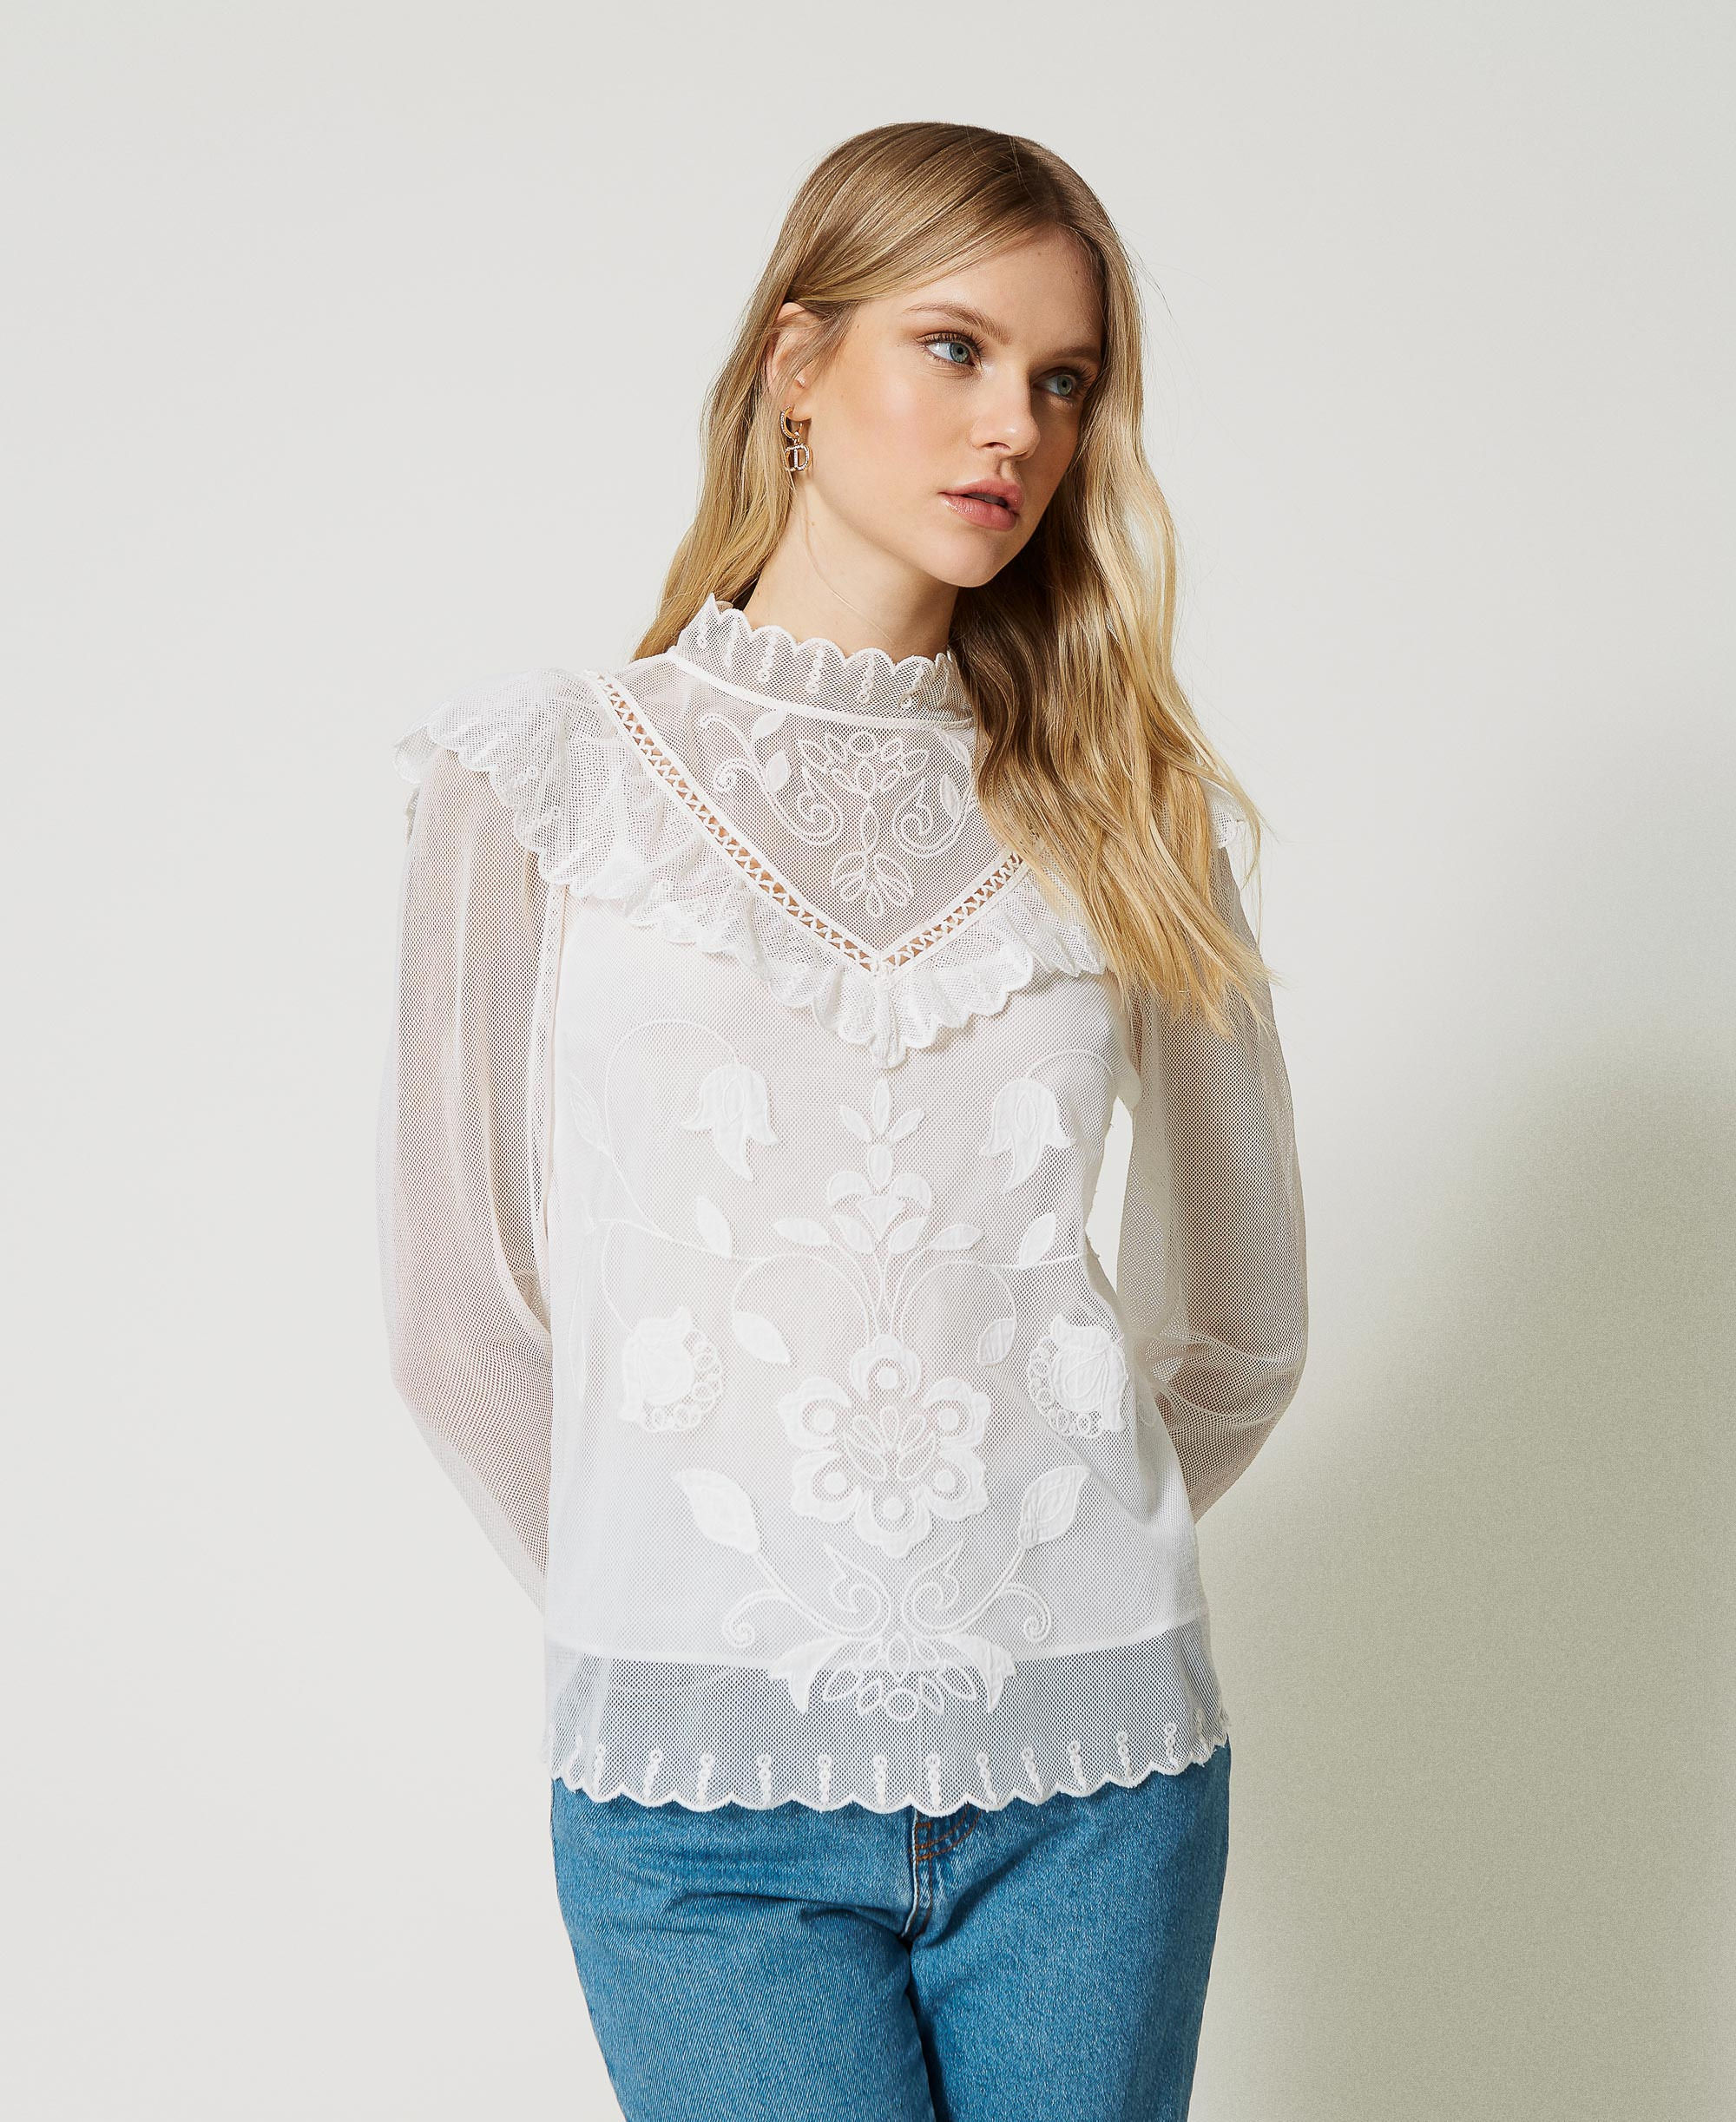 Mesh blouse with handmade embroidery